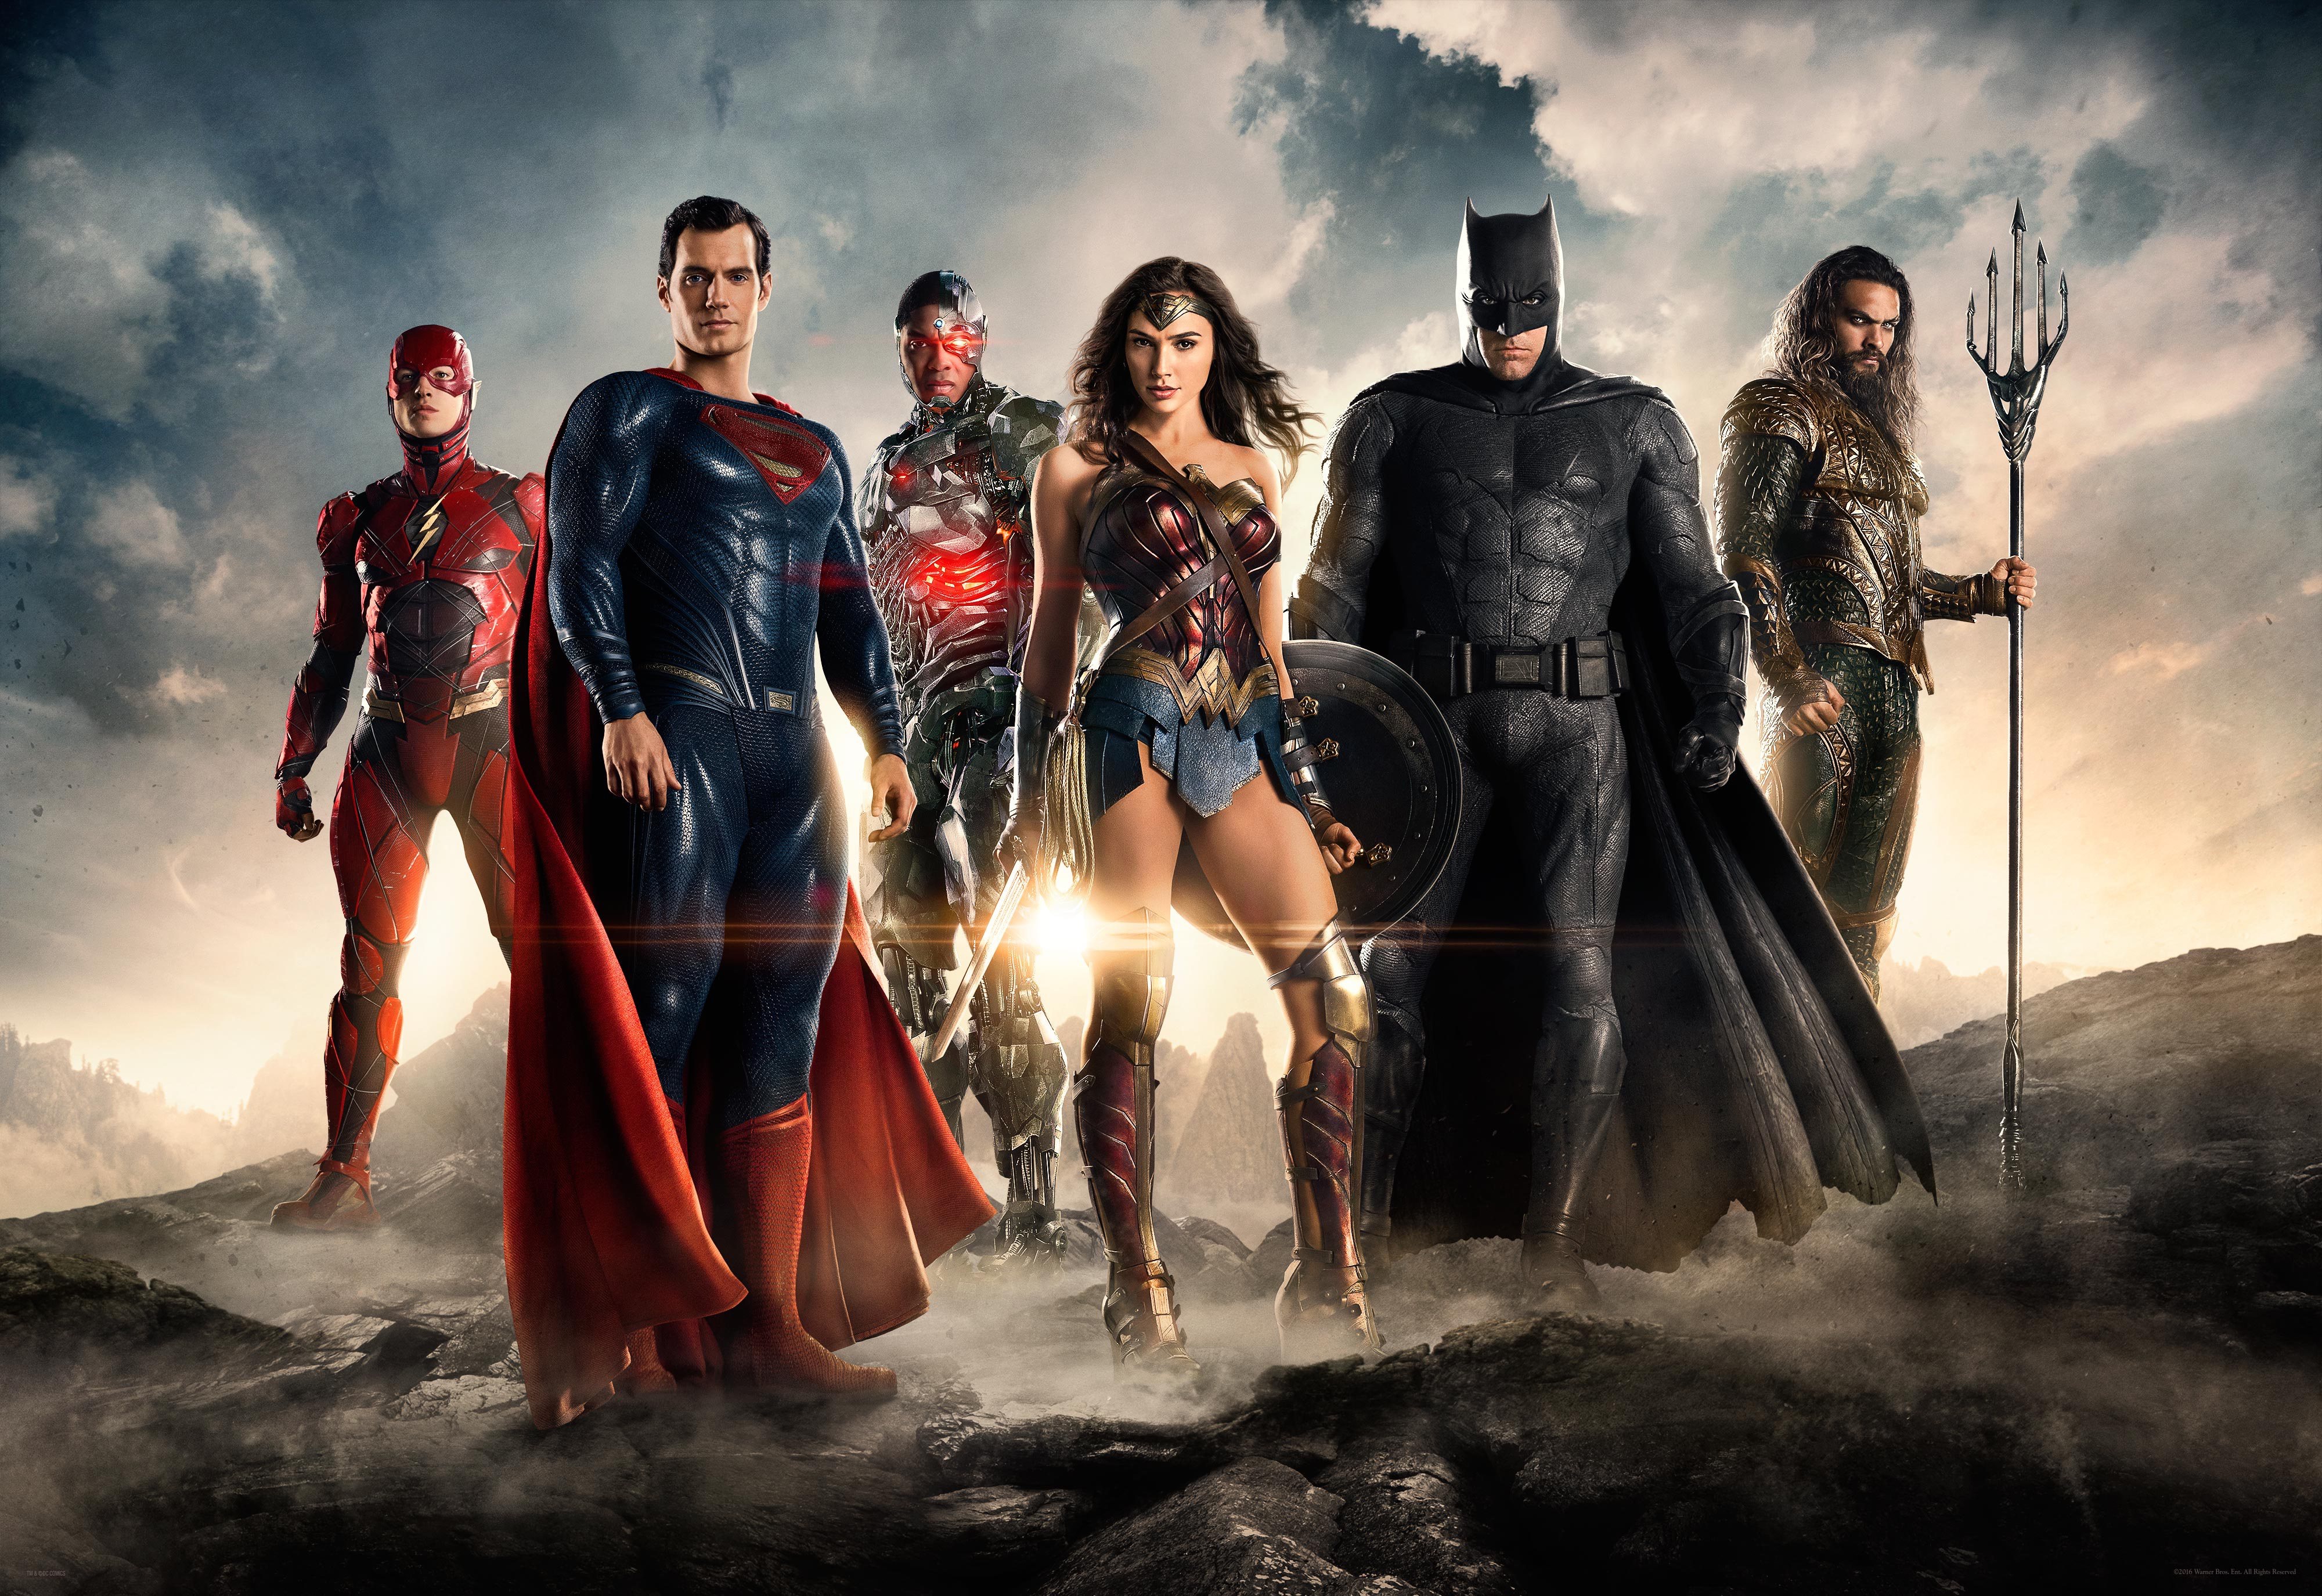 justice league actors will not return for new dcu projects